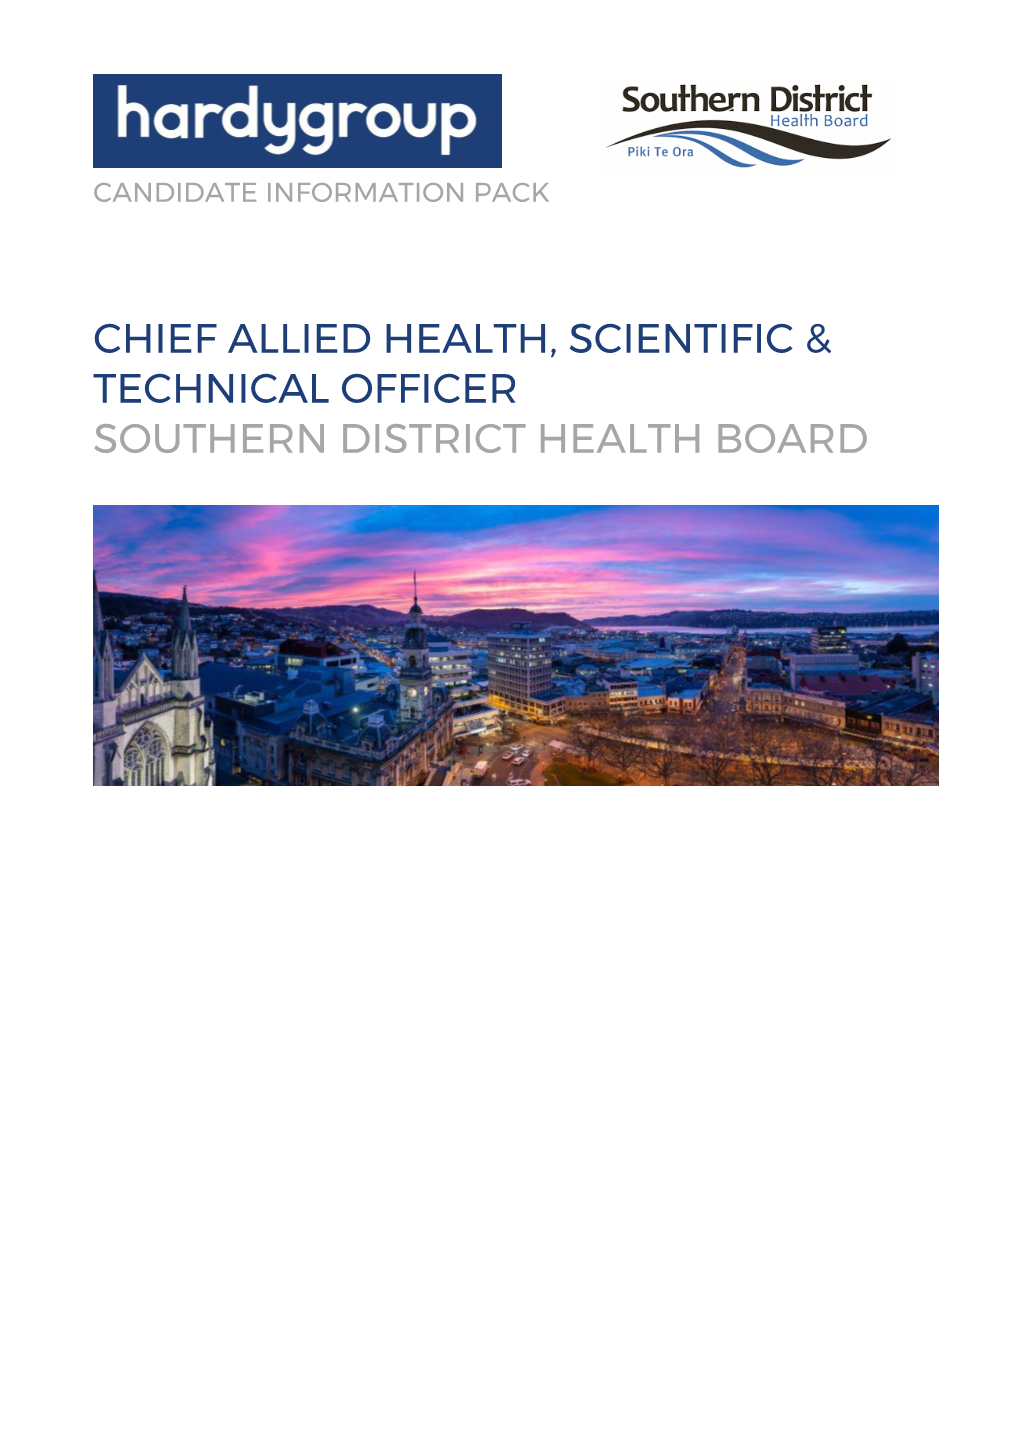 Chief Allied Health, Scientific & Technical Officer Southern District Health Board